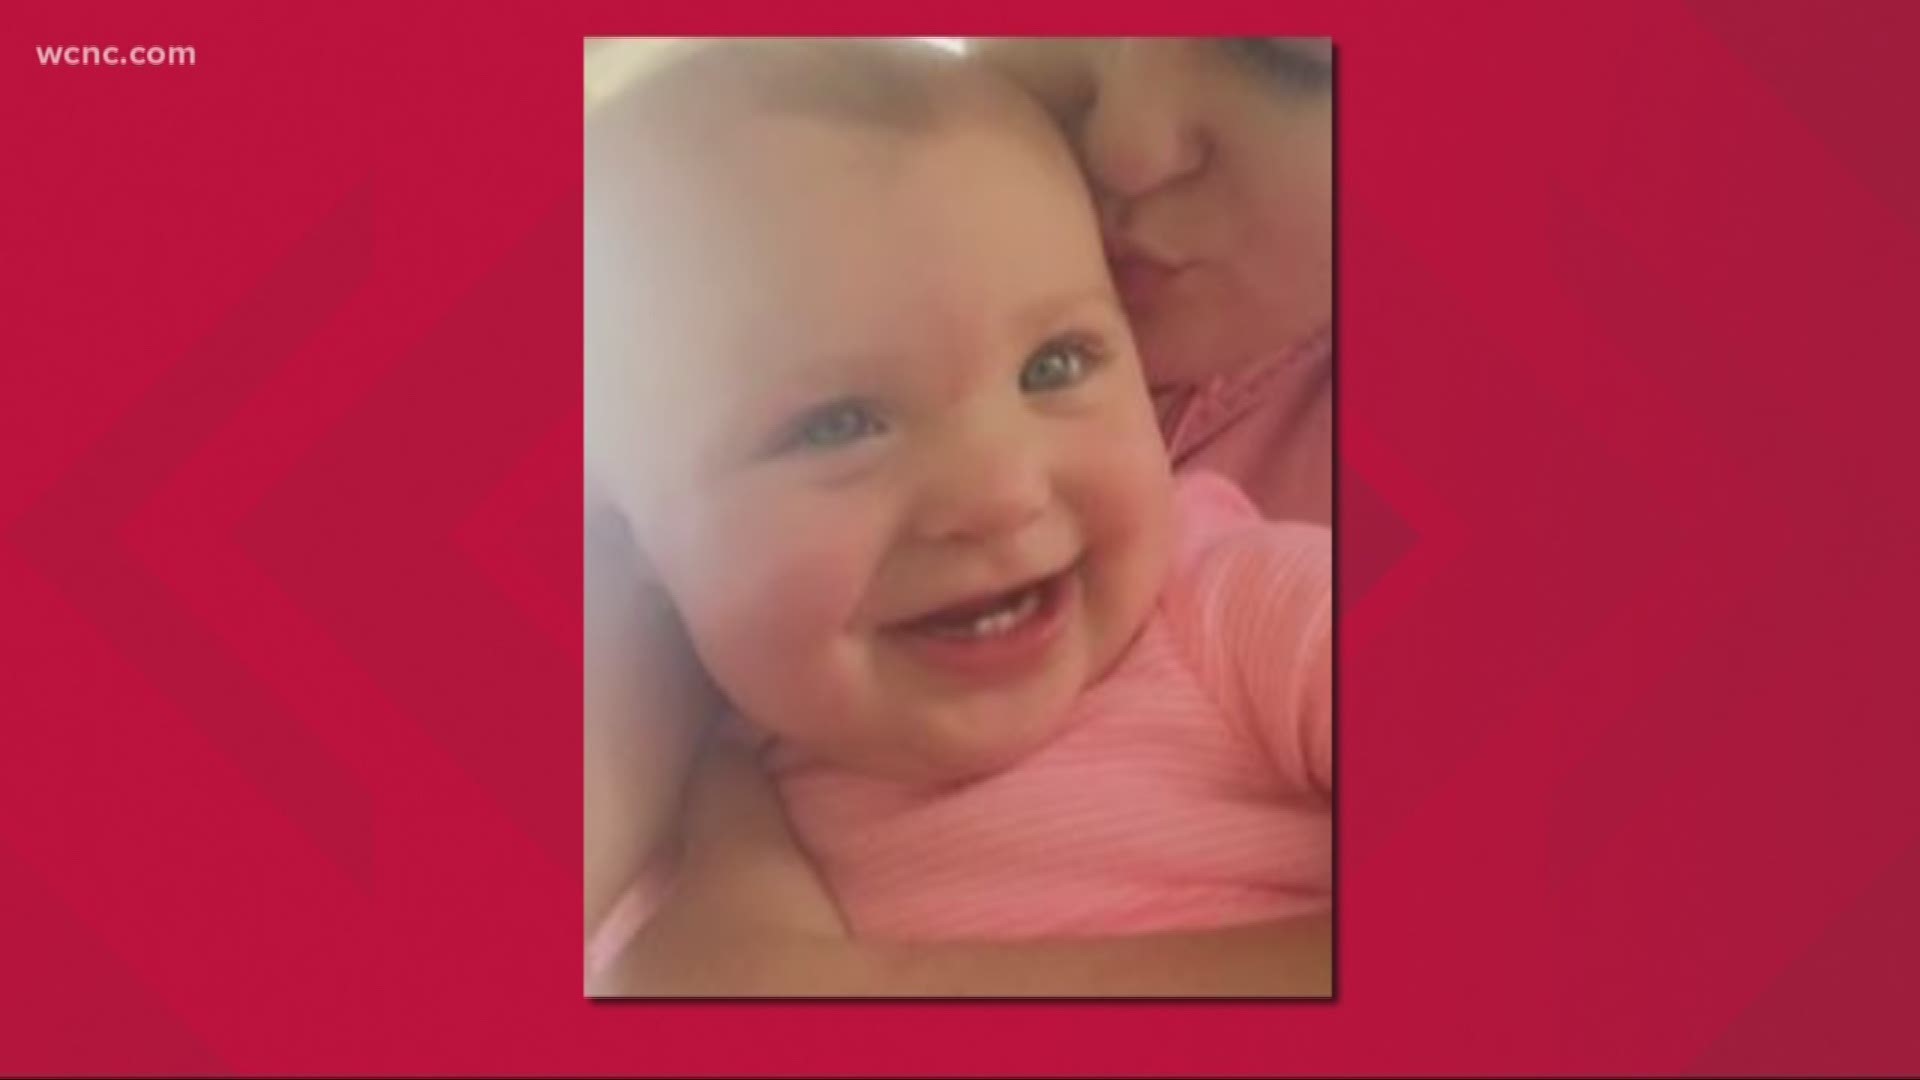 The Chesterfield County Sheriff's Office has placed a 19-year-old woman in custody after her 1-year-old daughter, who was at the center of an Amber Alert, was later found dead on Tuesday.